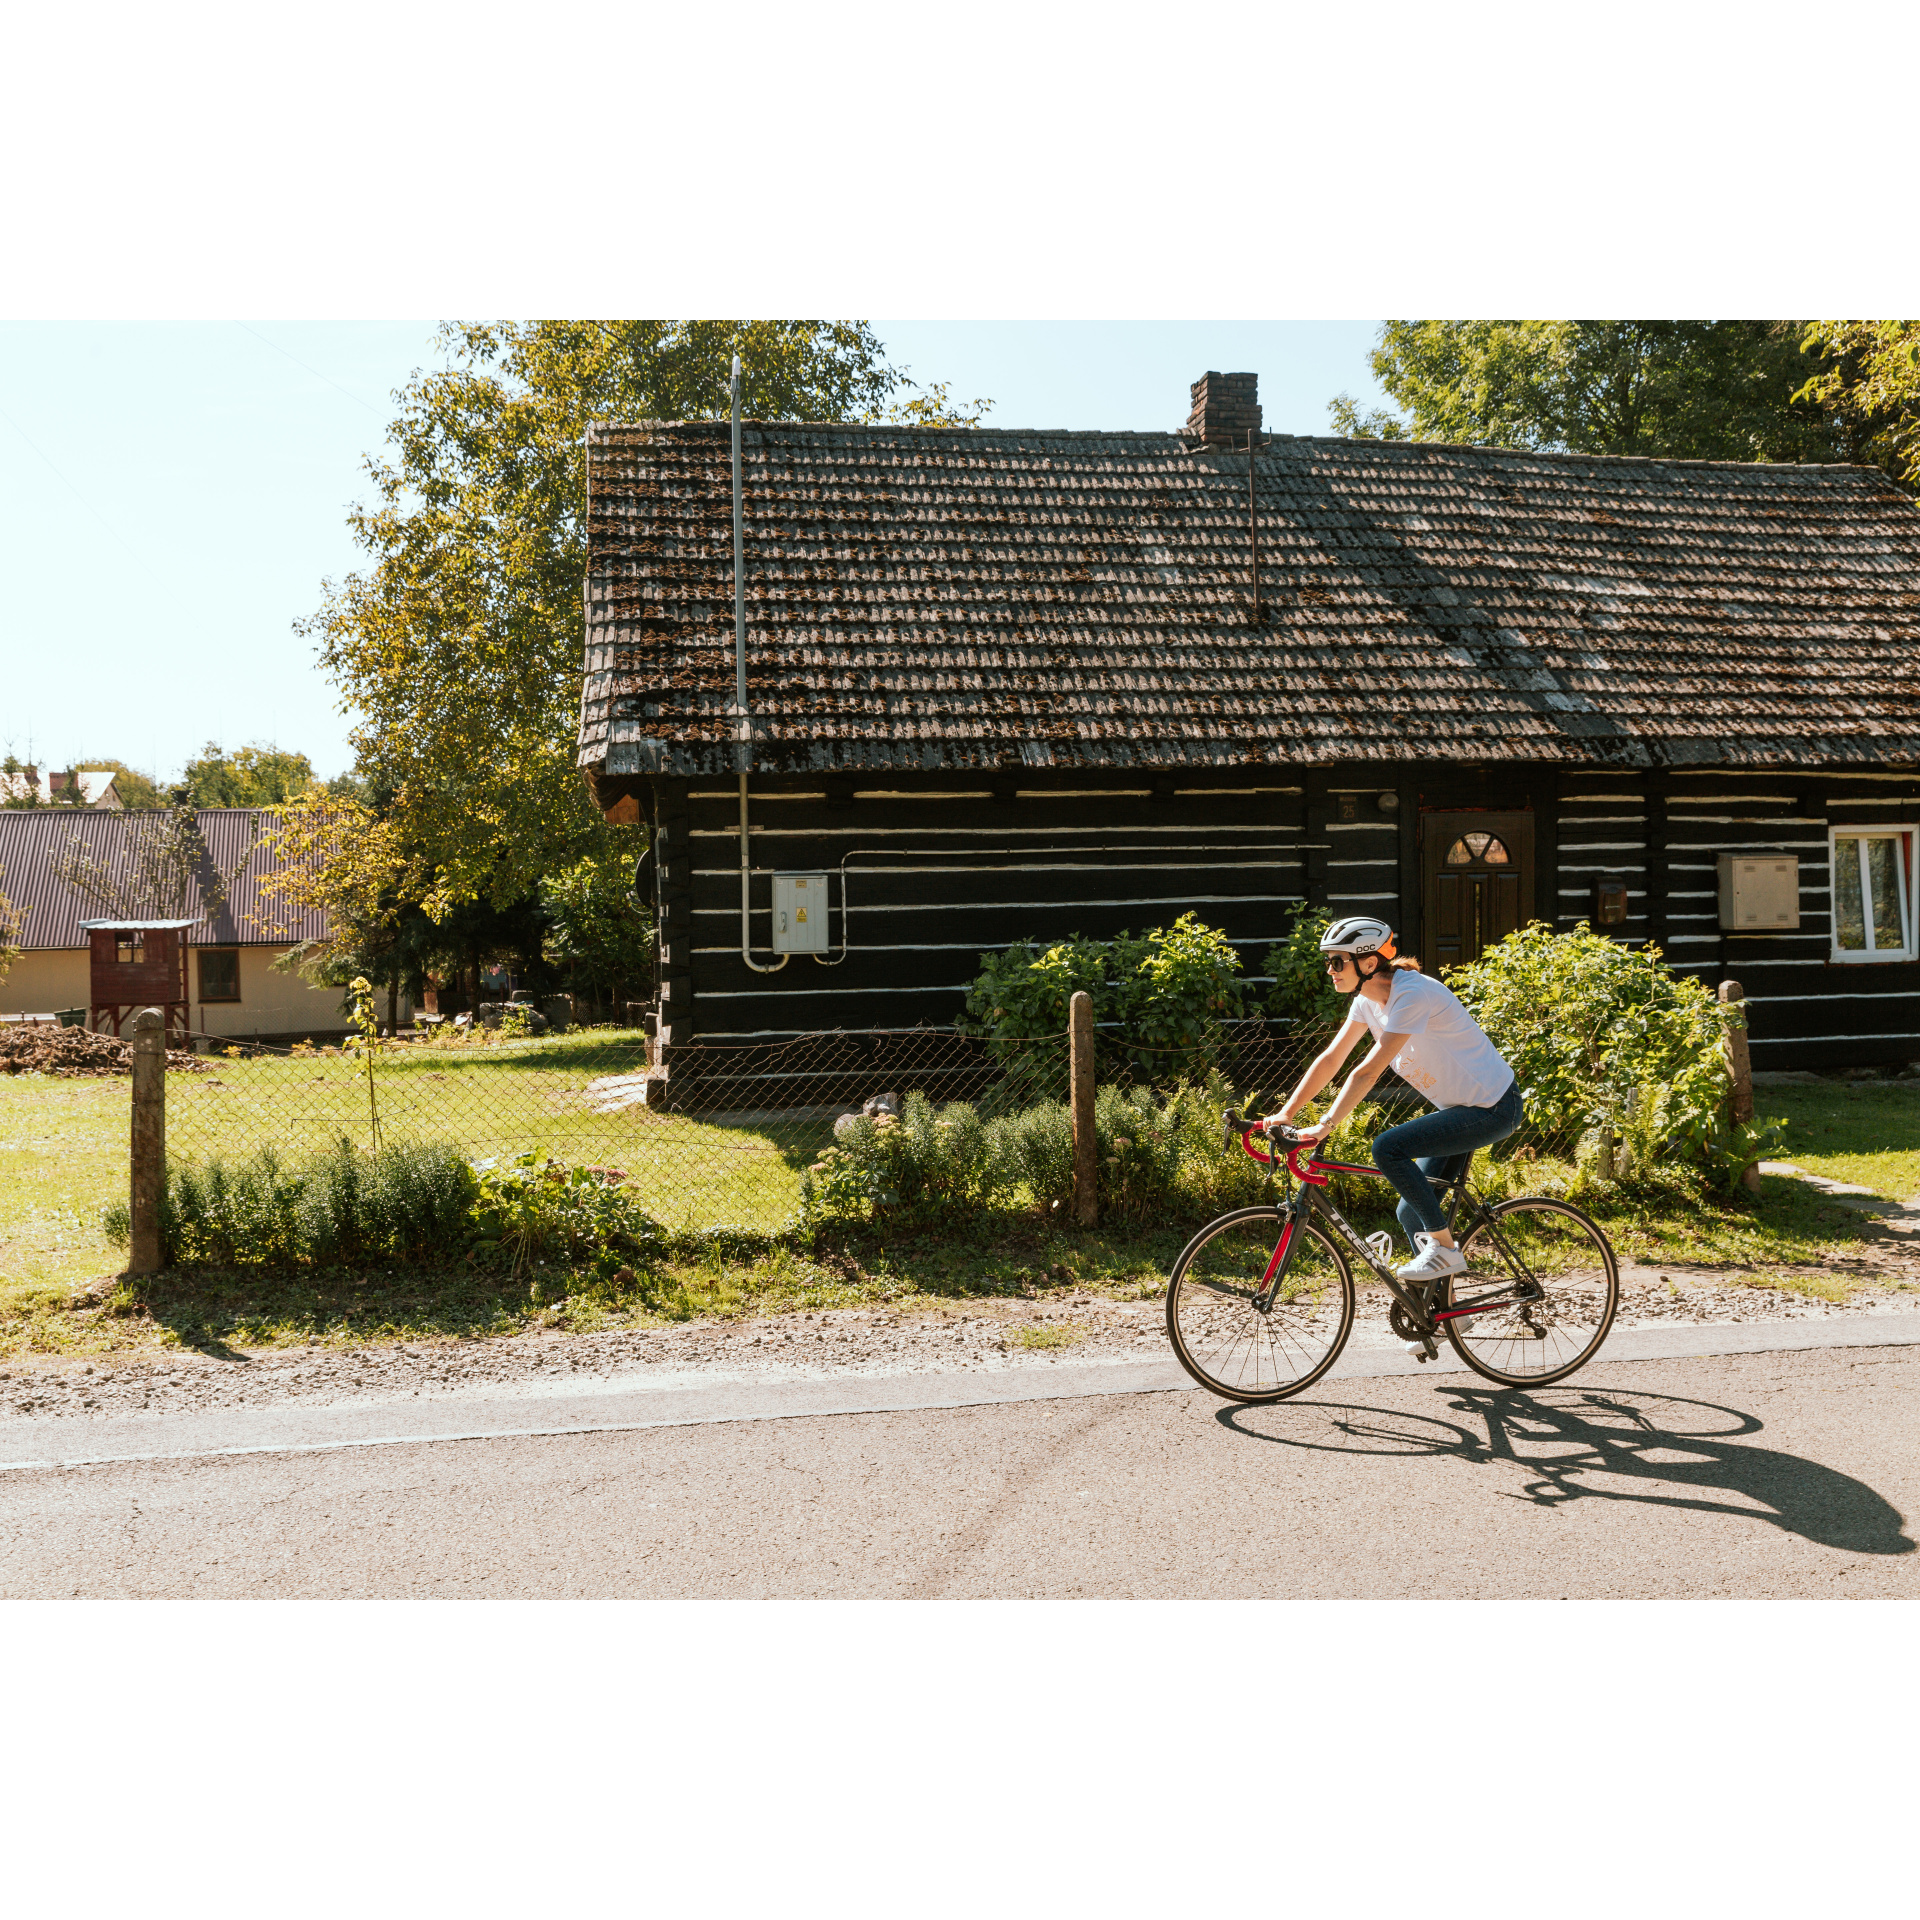 Cyclist and wooden house